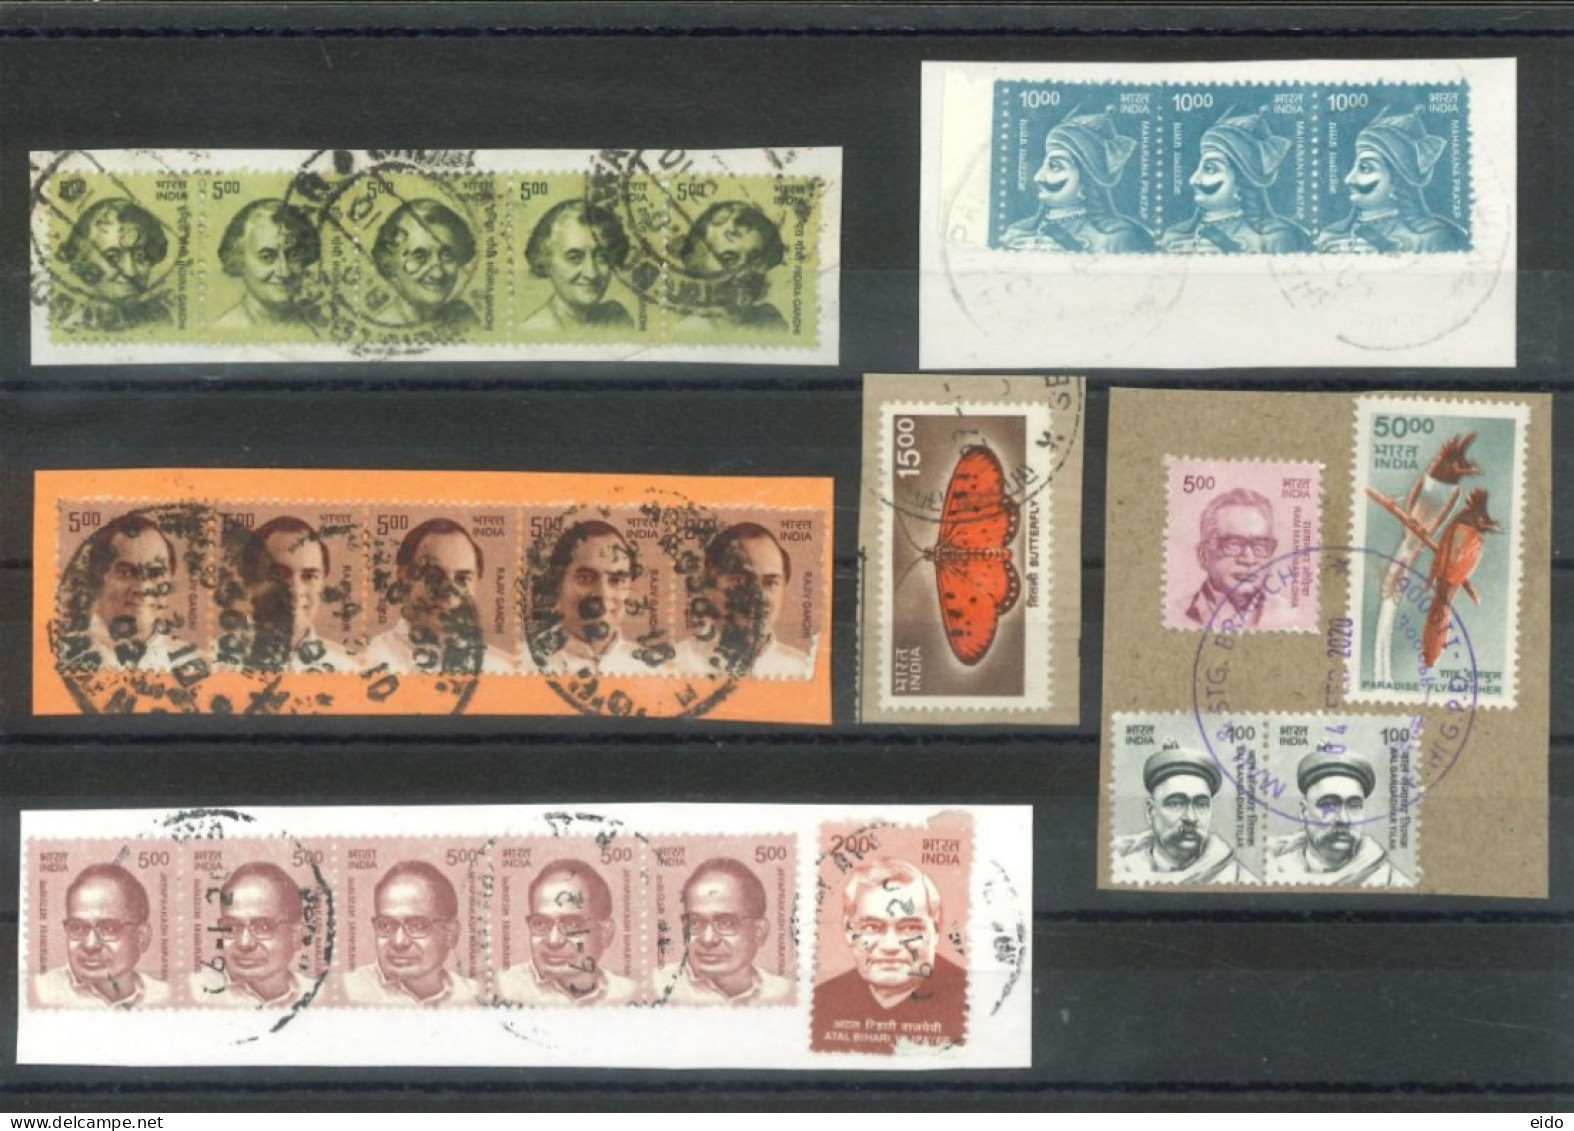 INDIA  -  DEFINITIVE STAMPS COLLECTION WITH POSTAGE SEAL, USED. - Used Stamps